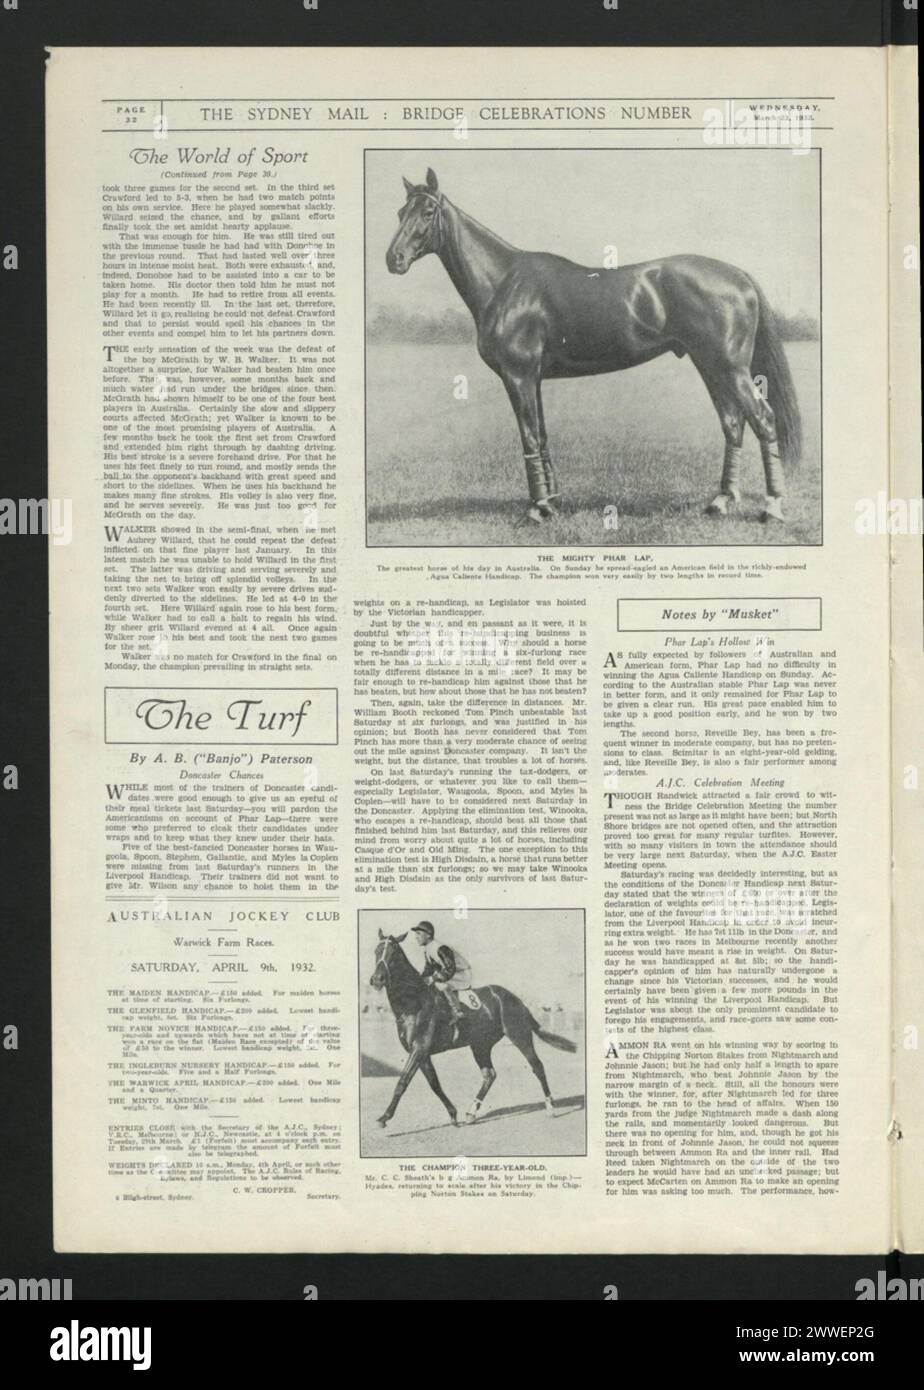 Description: The Mighty Phar Lap. The greatest horse of his day in Australia. On Sunday he spread-eagled as an American field in the richly endowed, Agus Caliente Handicap. The champion won very easily by two lengths in record time. Location: Sydney, New South Wales, Australia Date: 23 March 1932 Description: The Champion three-year-old. Location: Sydney, New South Wales, Australia Date: 23 March 1932 australia, australasia, oceania, australasiathroughalens Stock Photo